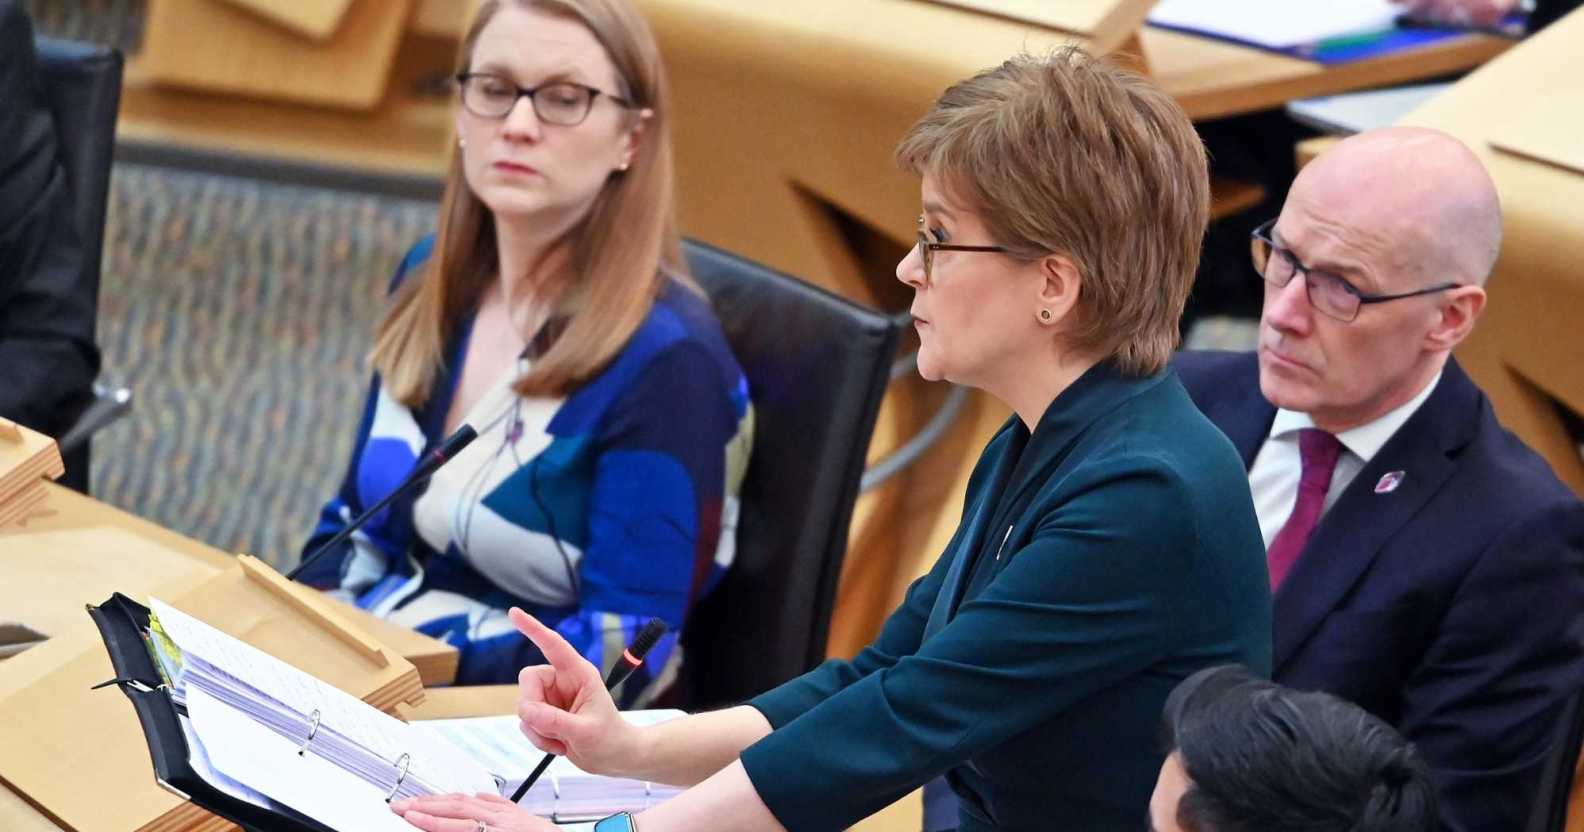 A screenshot of Nicola Sturgeon wearing a navy suit as she talks during First Ministers Questions at the Scottish Parliament